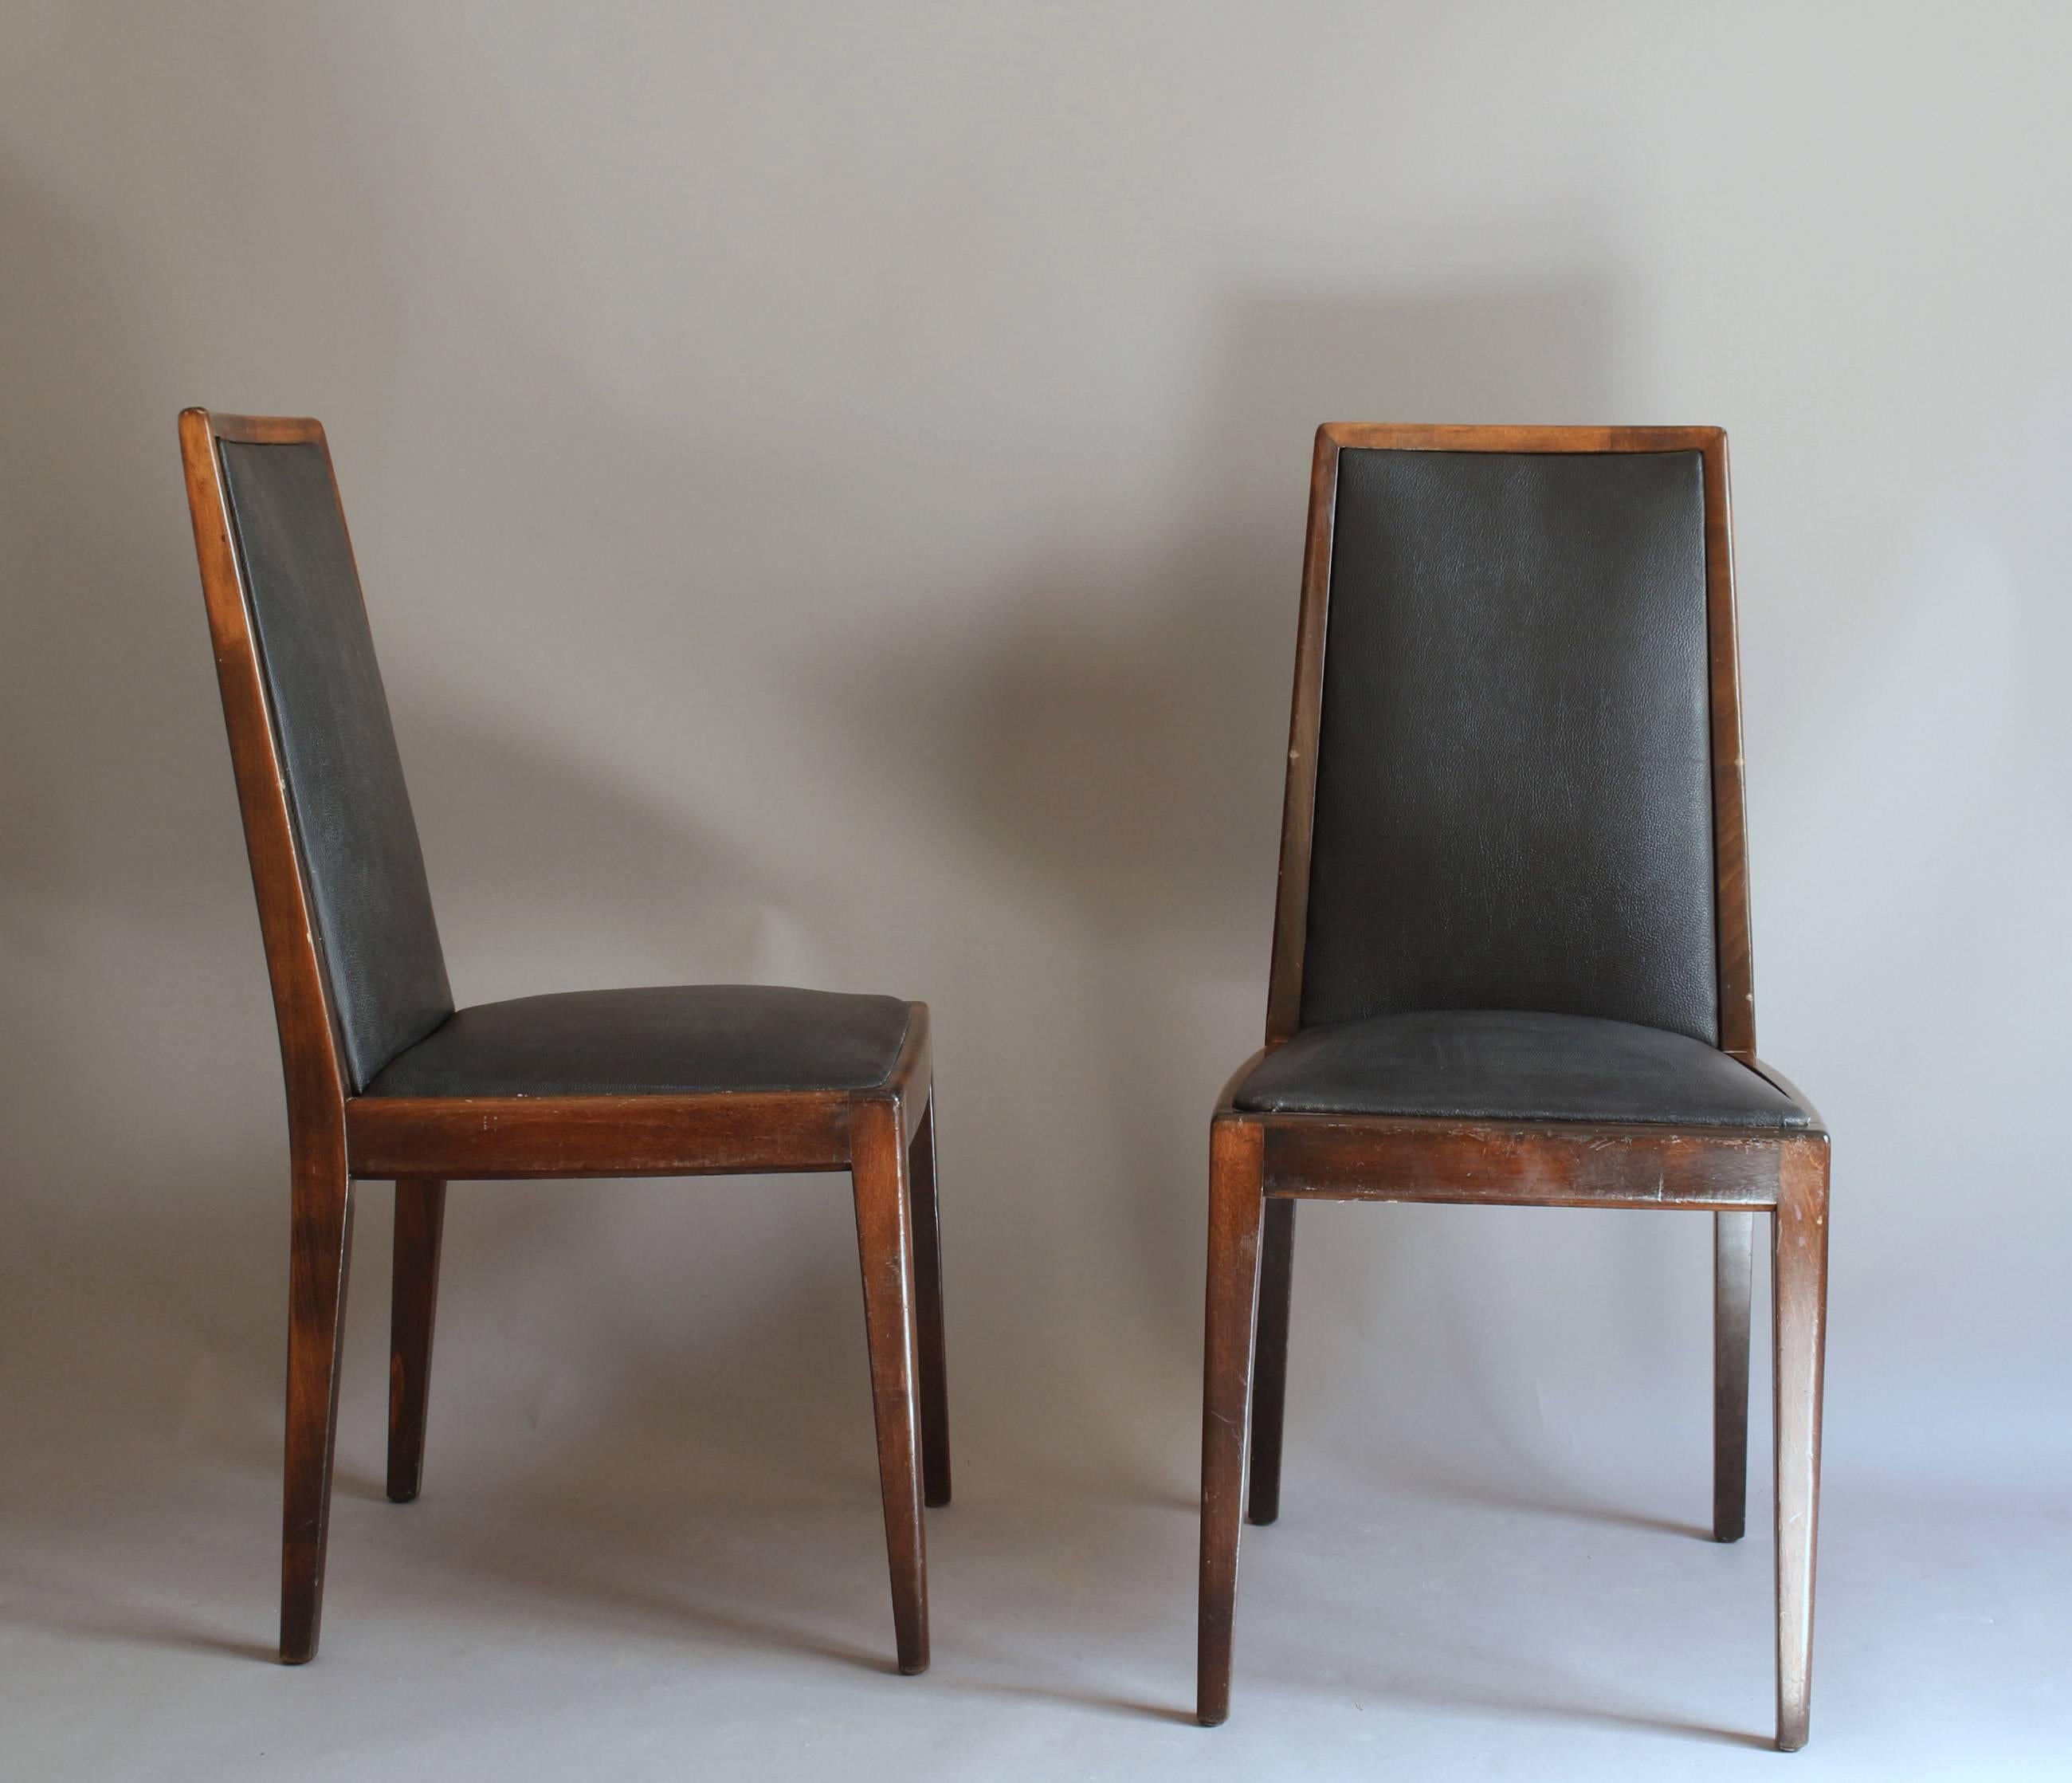 A set of fine 12 Art Deco stained beech dining chairs.
The chairs have been refinished.

